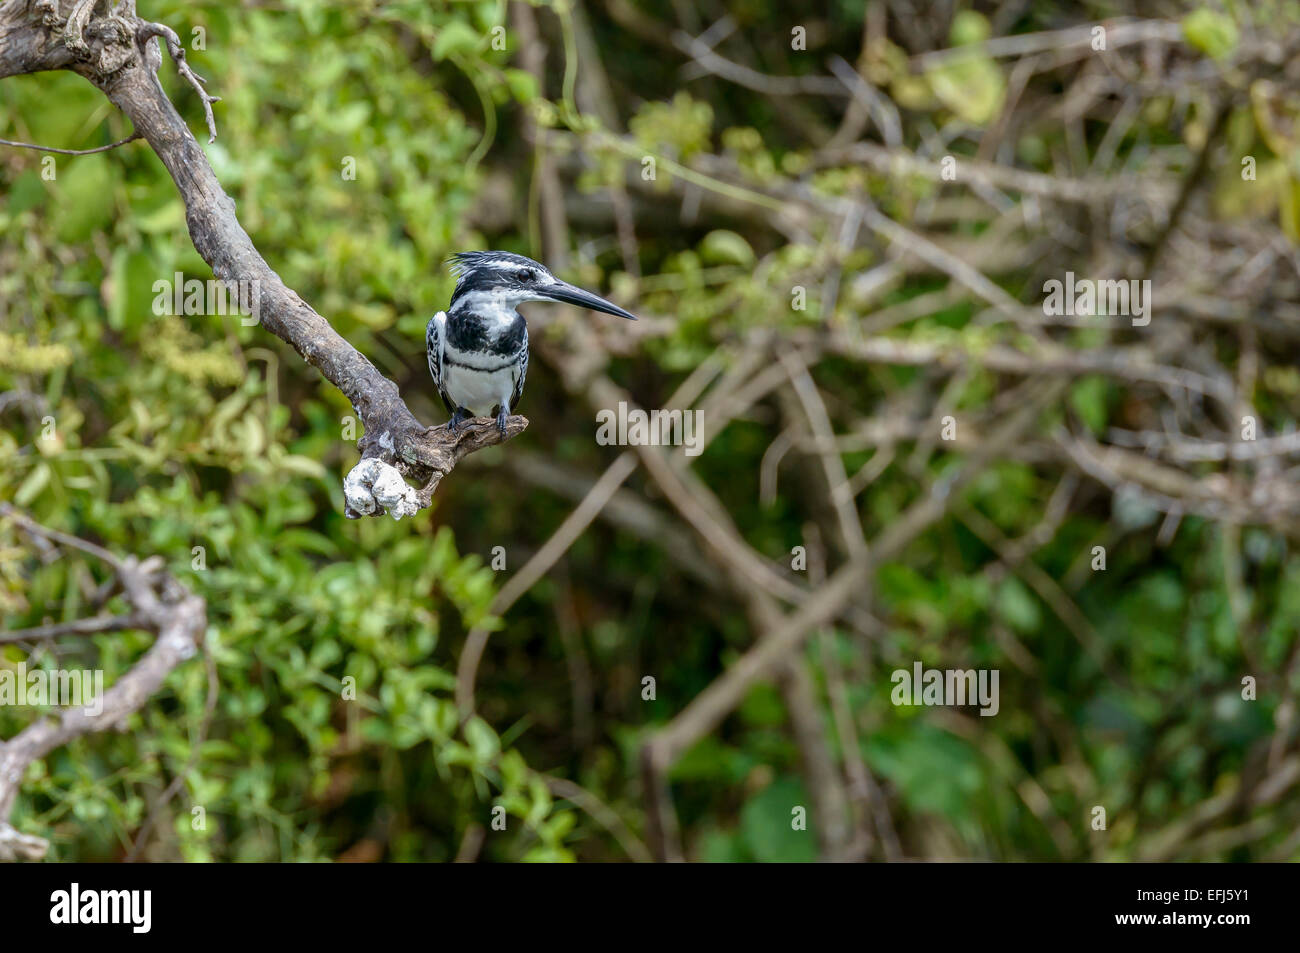 Ugandan wildlife birds - Adult male pied kingfisher (Ceryle rudis) perched on a tree bough. Stock Photo